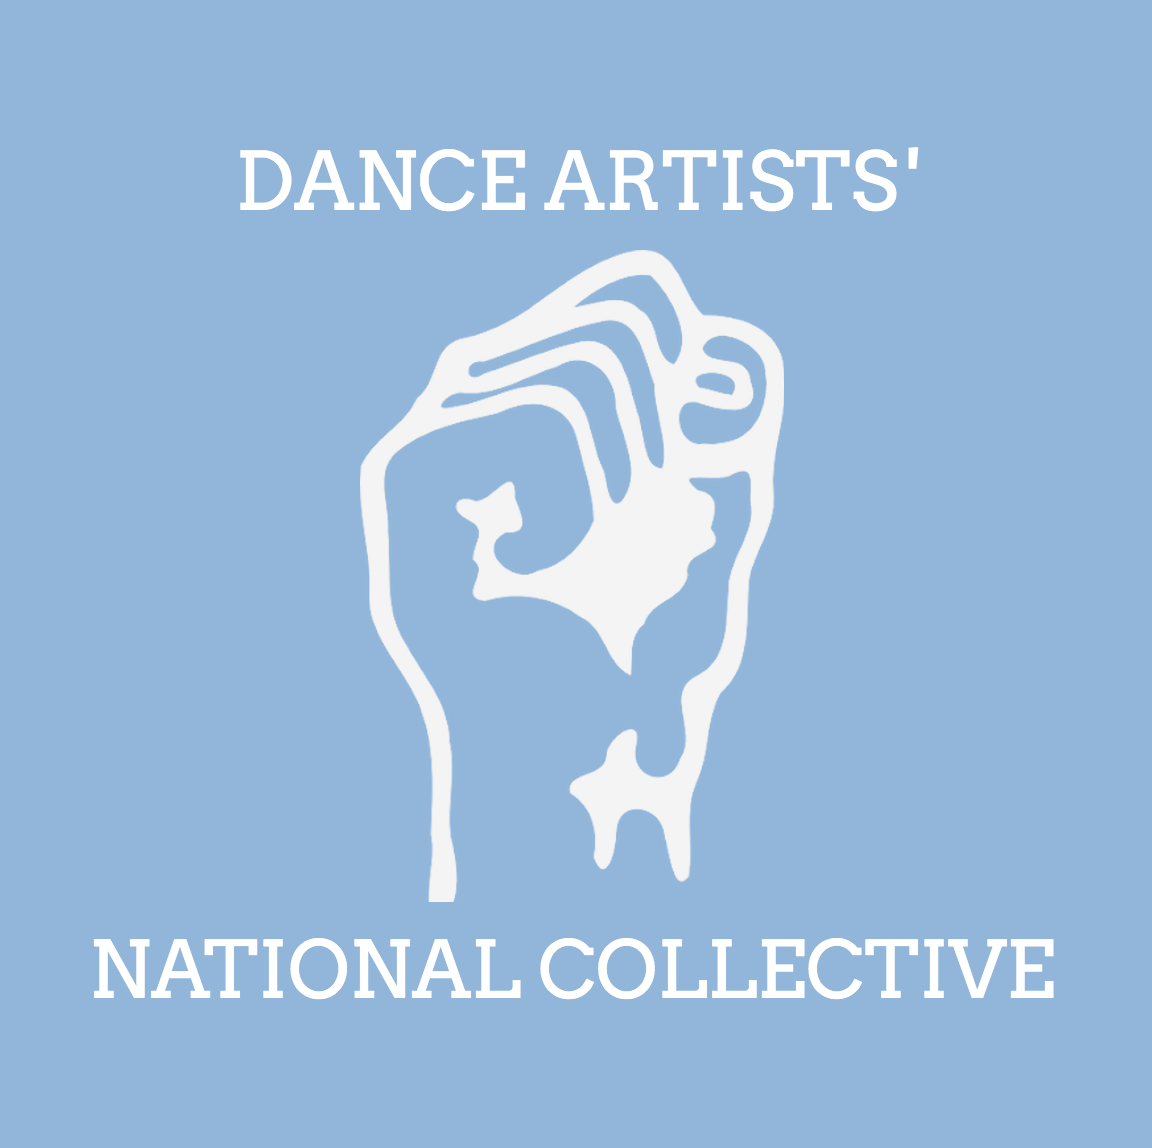 Dance Artists' National Collective with a fist against a blue background